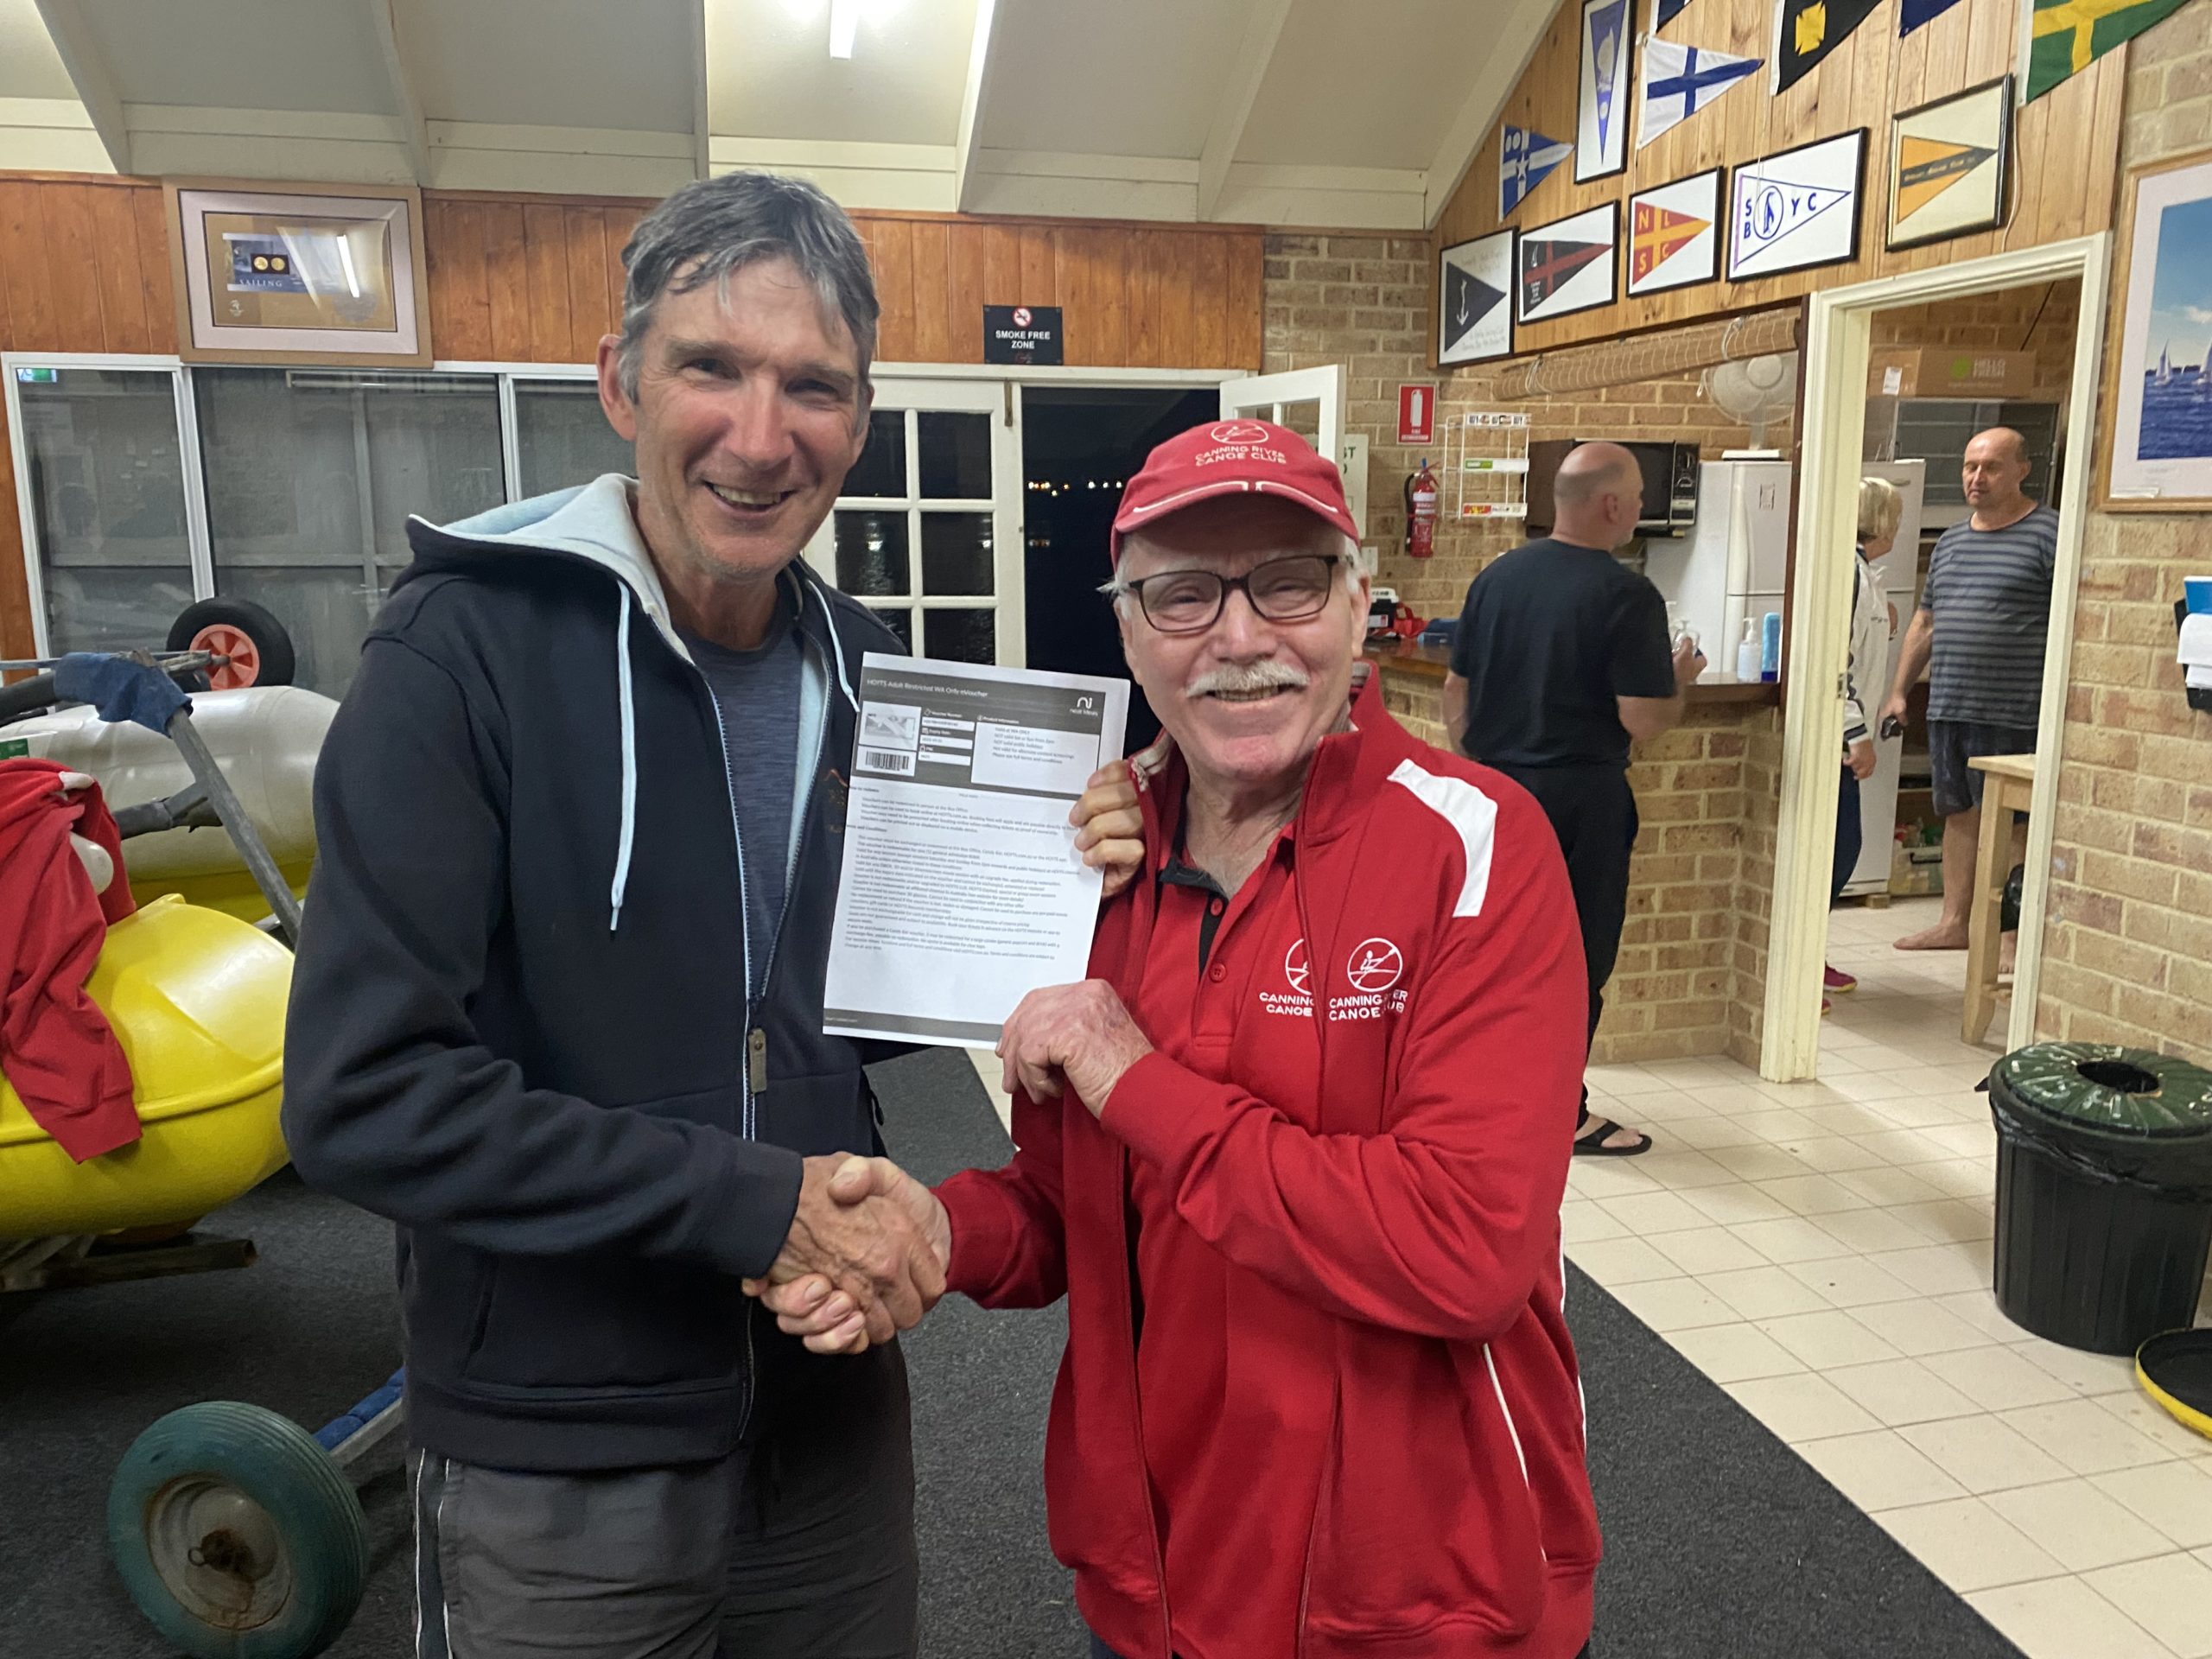 Tuesday 27th September 2022 : Tonight’s photo shows club member Dean Wingfield presenting tonight’s winner David Gardiner with a movie voucher.